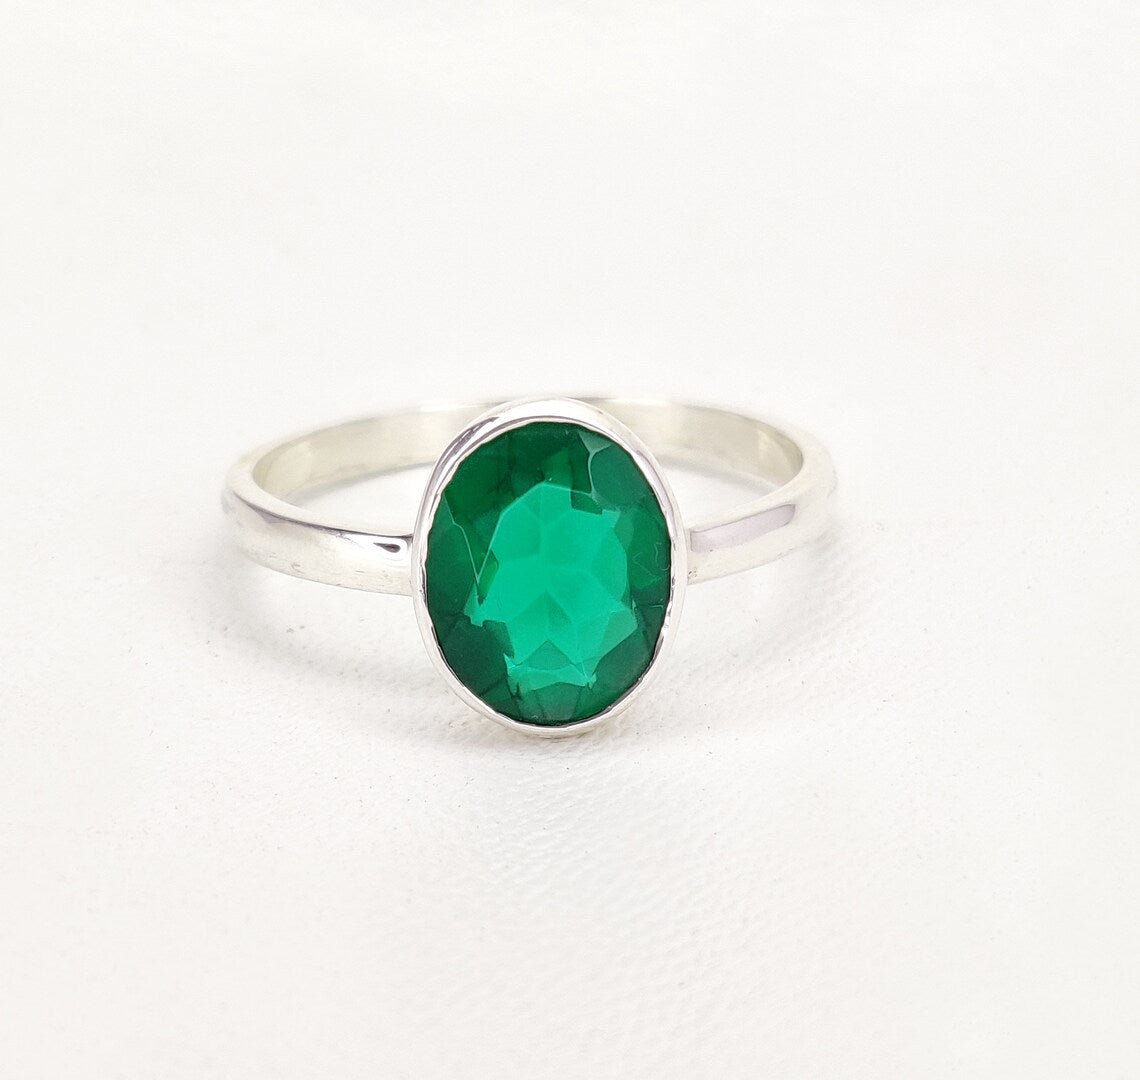 Oval Shape Emerald Sterling Silver Ring - Stone size 8x10mm